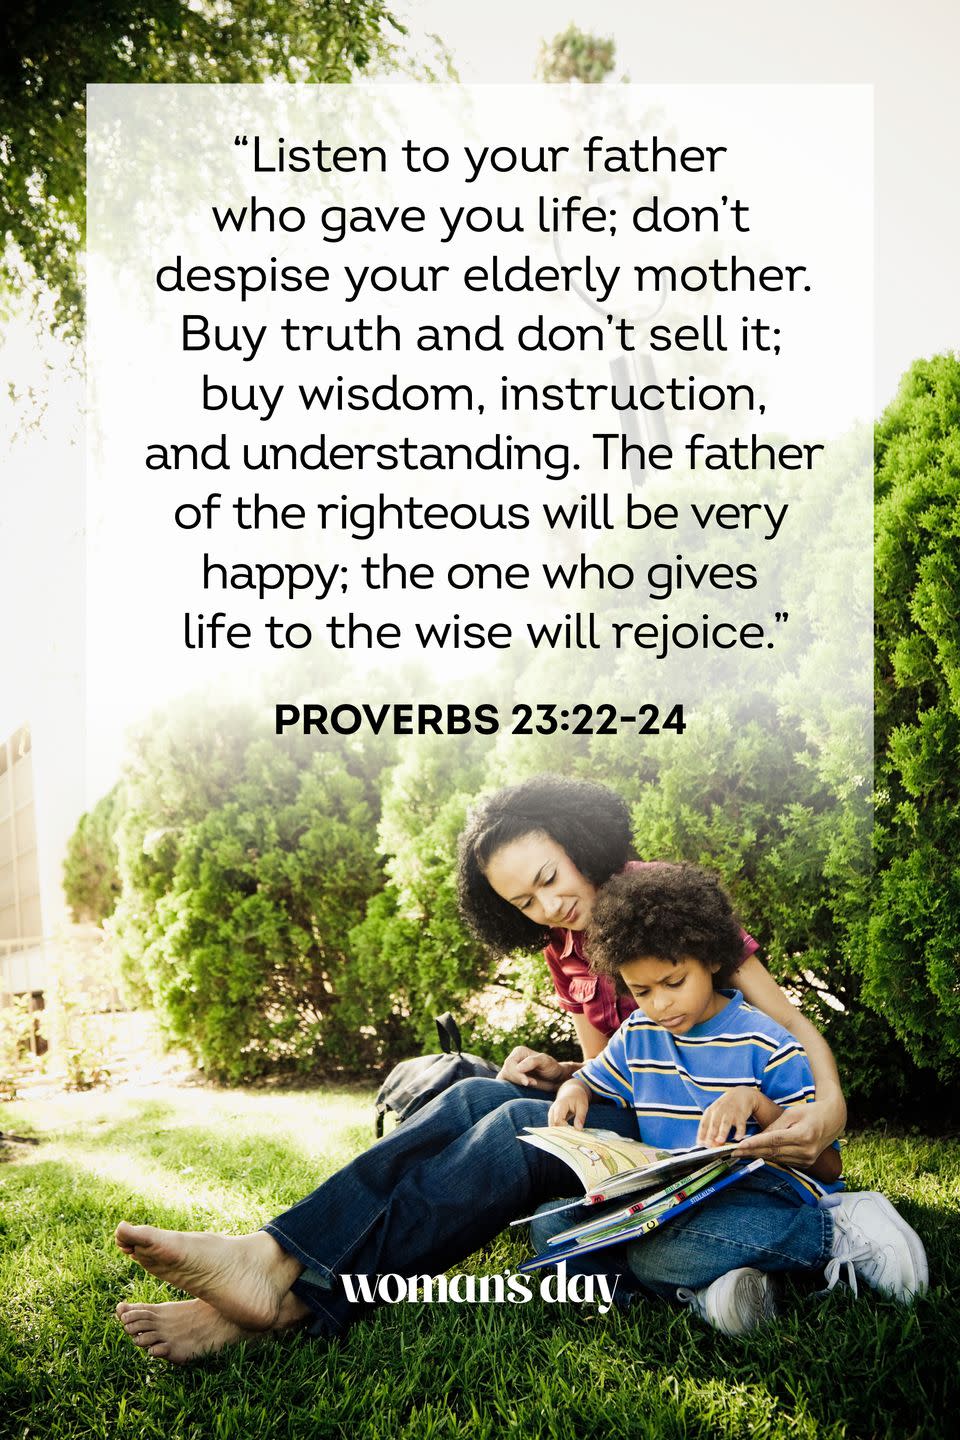 mothers day bible verses proverbs 23 22 24